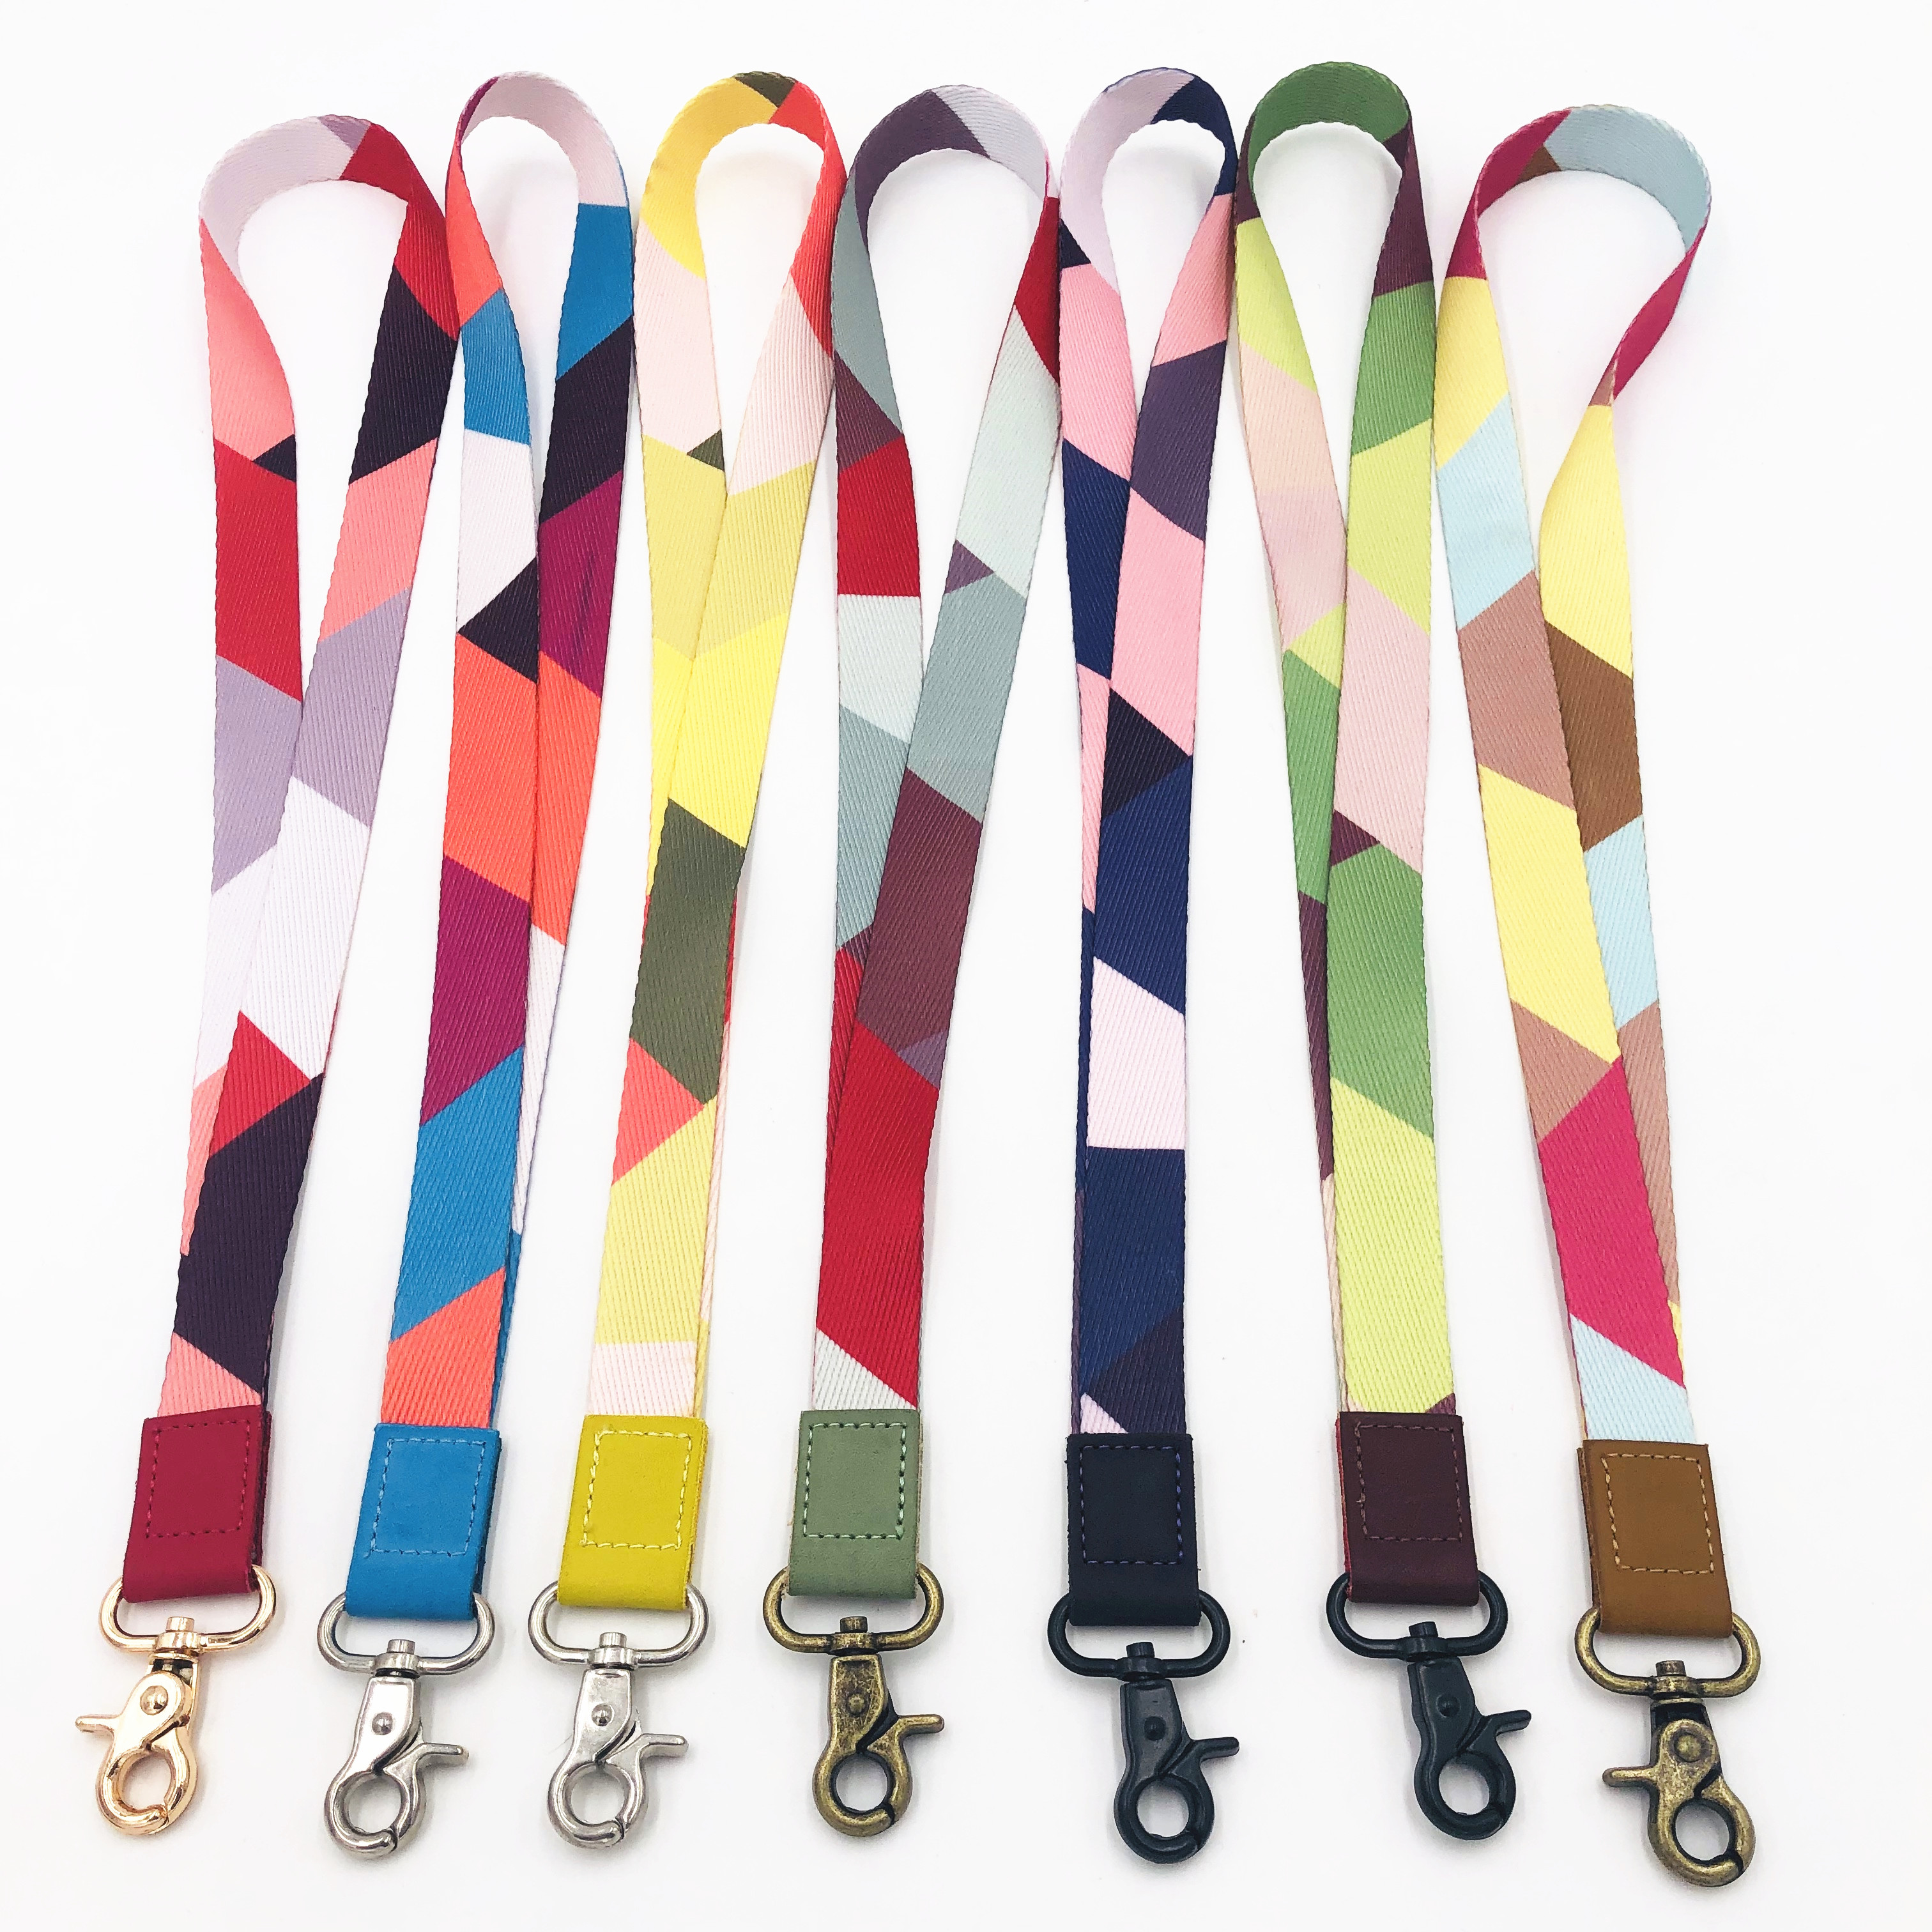 China Mens Leather Lanyard Manufacturers and Factory, Suppliers ...